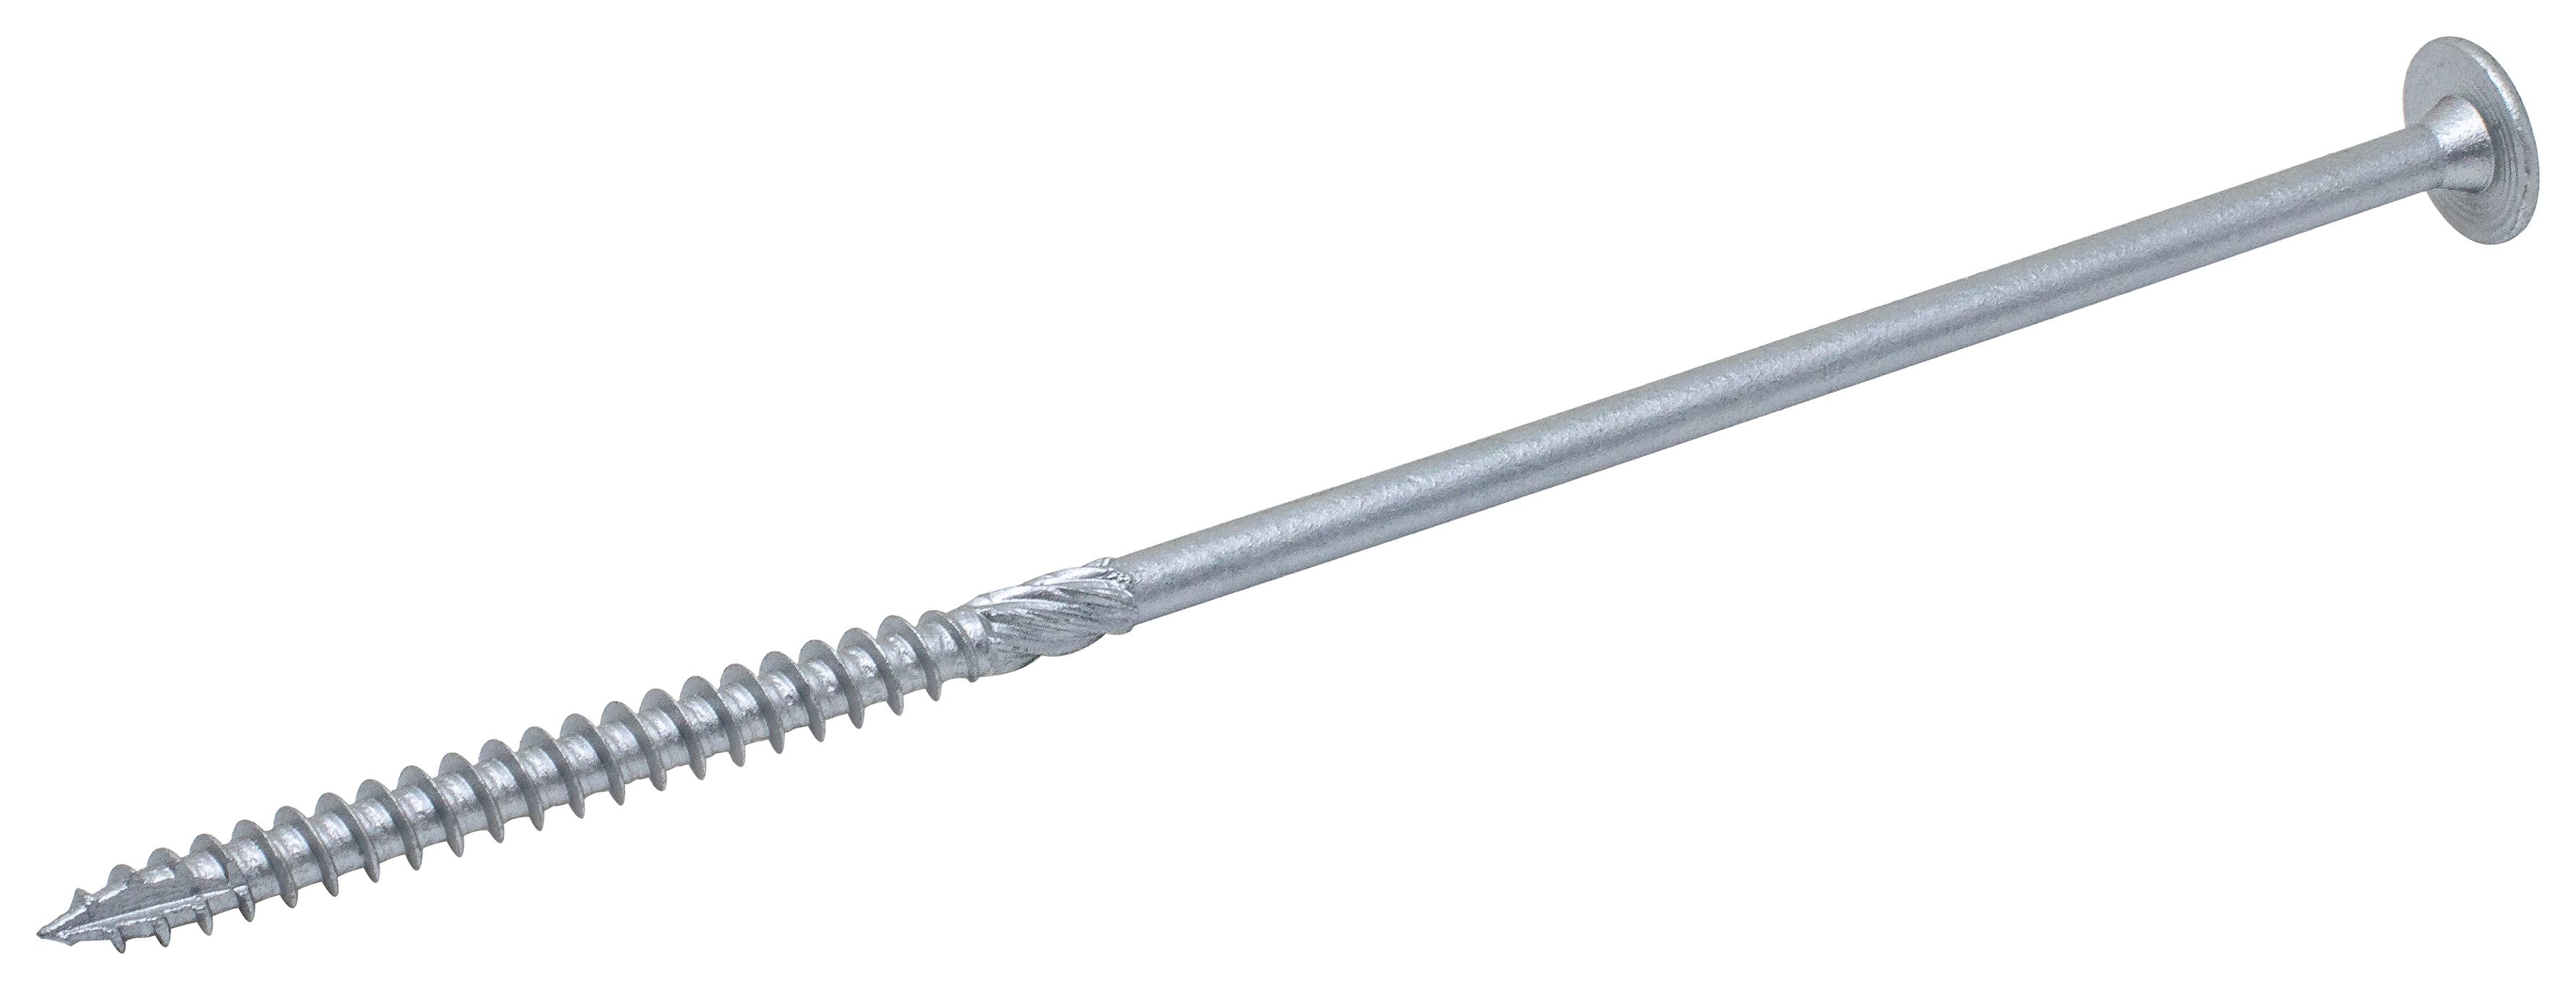 Image of Wickes Timber Drive Tx Washer Head Silver Screw - 7x100mm Pack Of 25